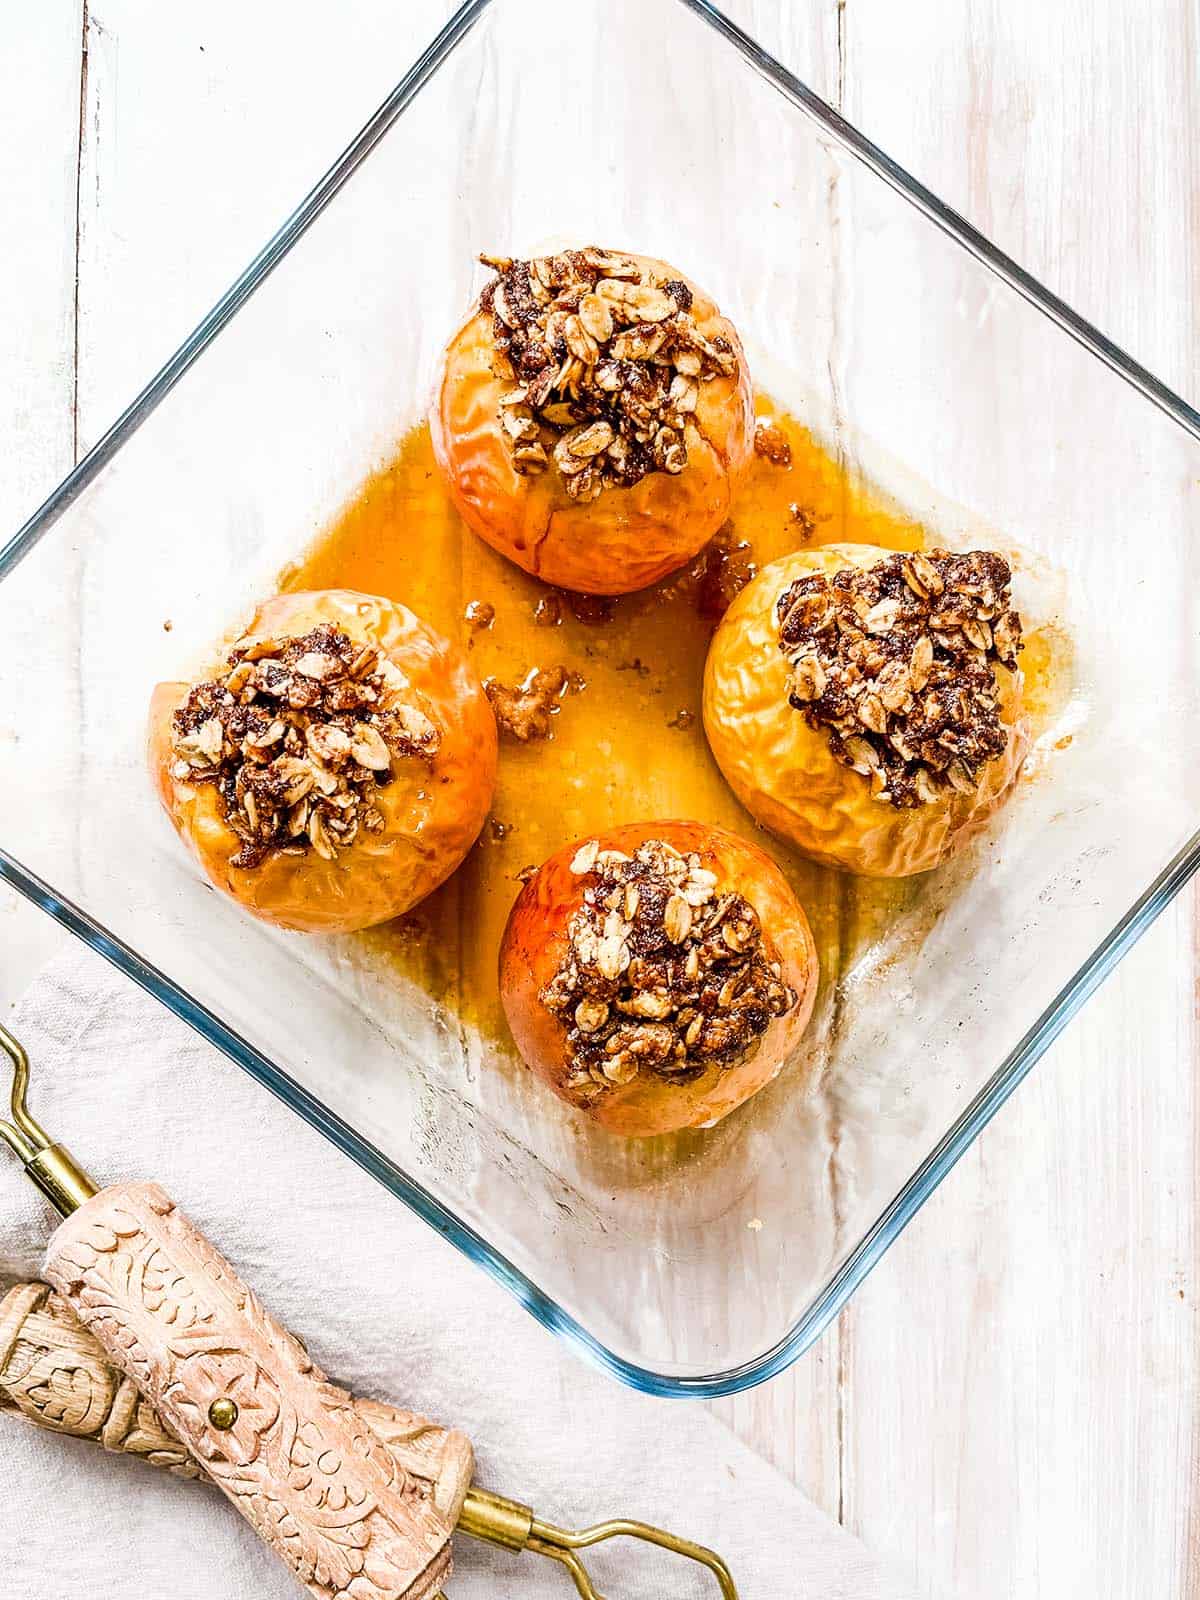 Baked Apples | Weight Watchers